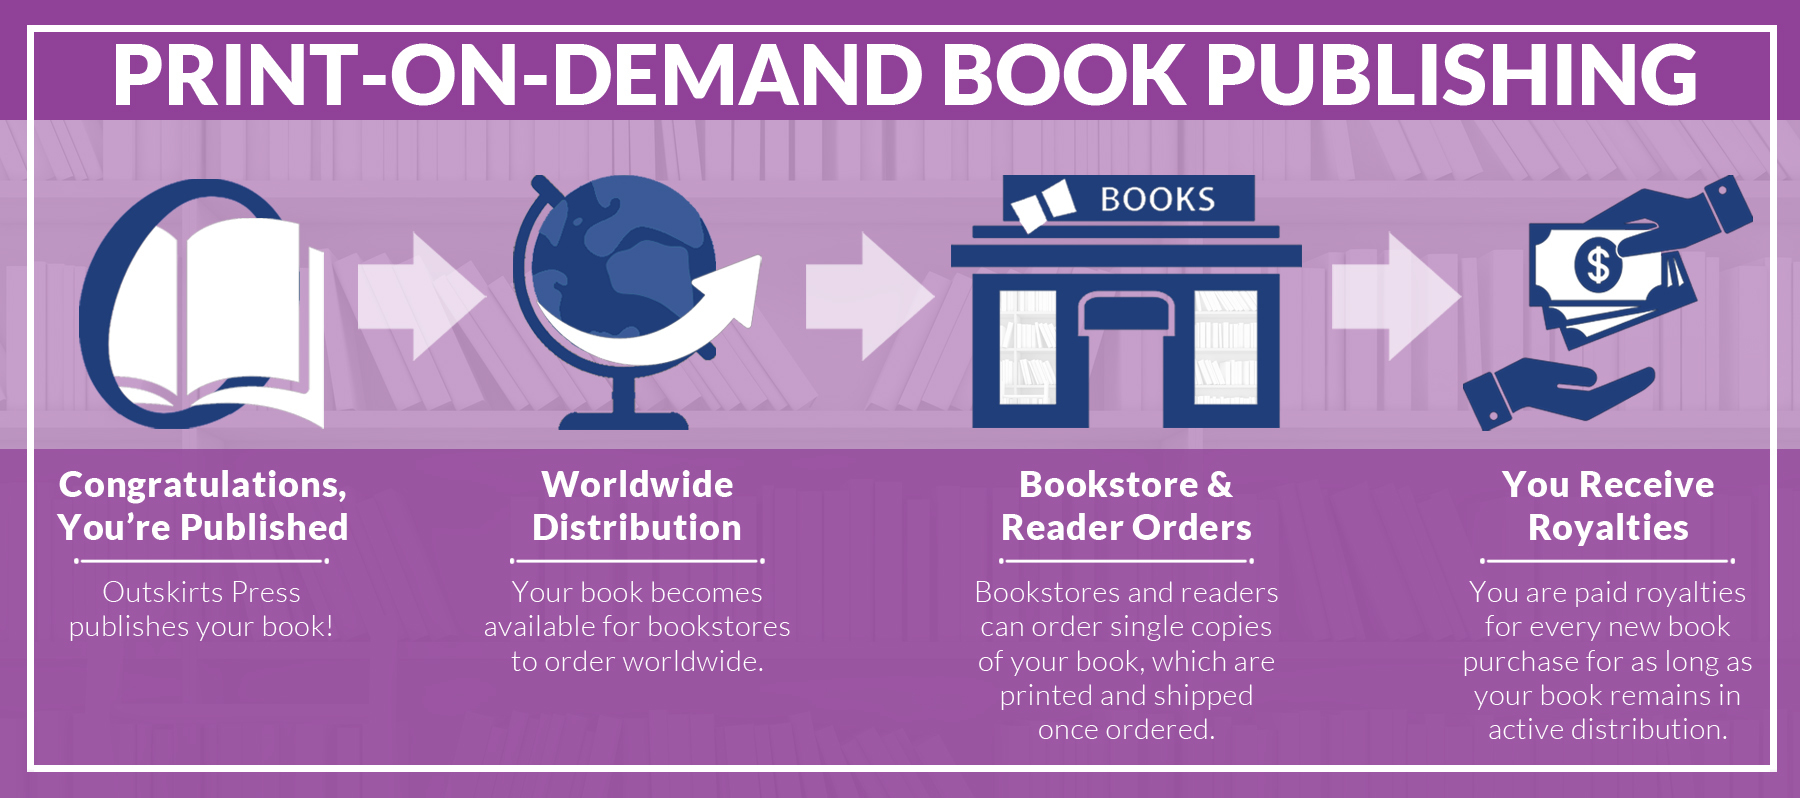 PRINT-ON-DEMAND BOOK PUBLISHING WITH OUTKSKIRTS PRESS: Once Outskirts Press publishes your book, it becomes available for bookstores to order worldwide. Online & offline bookstores can order copies of your book, which are printed and shipped once ordered. You, as the author, are paid royalties for every new book purchase for as long as your book remains in active distribution.